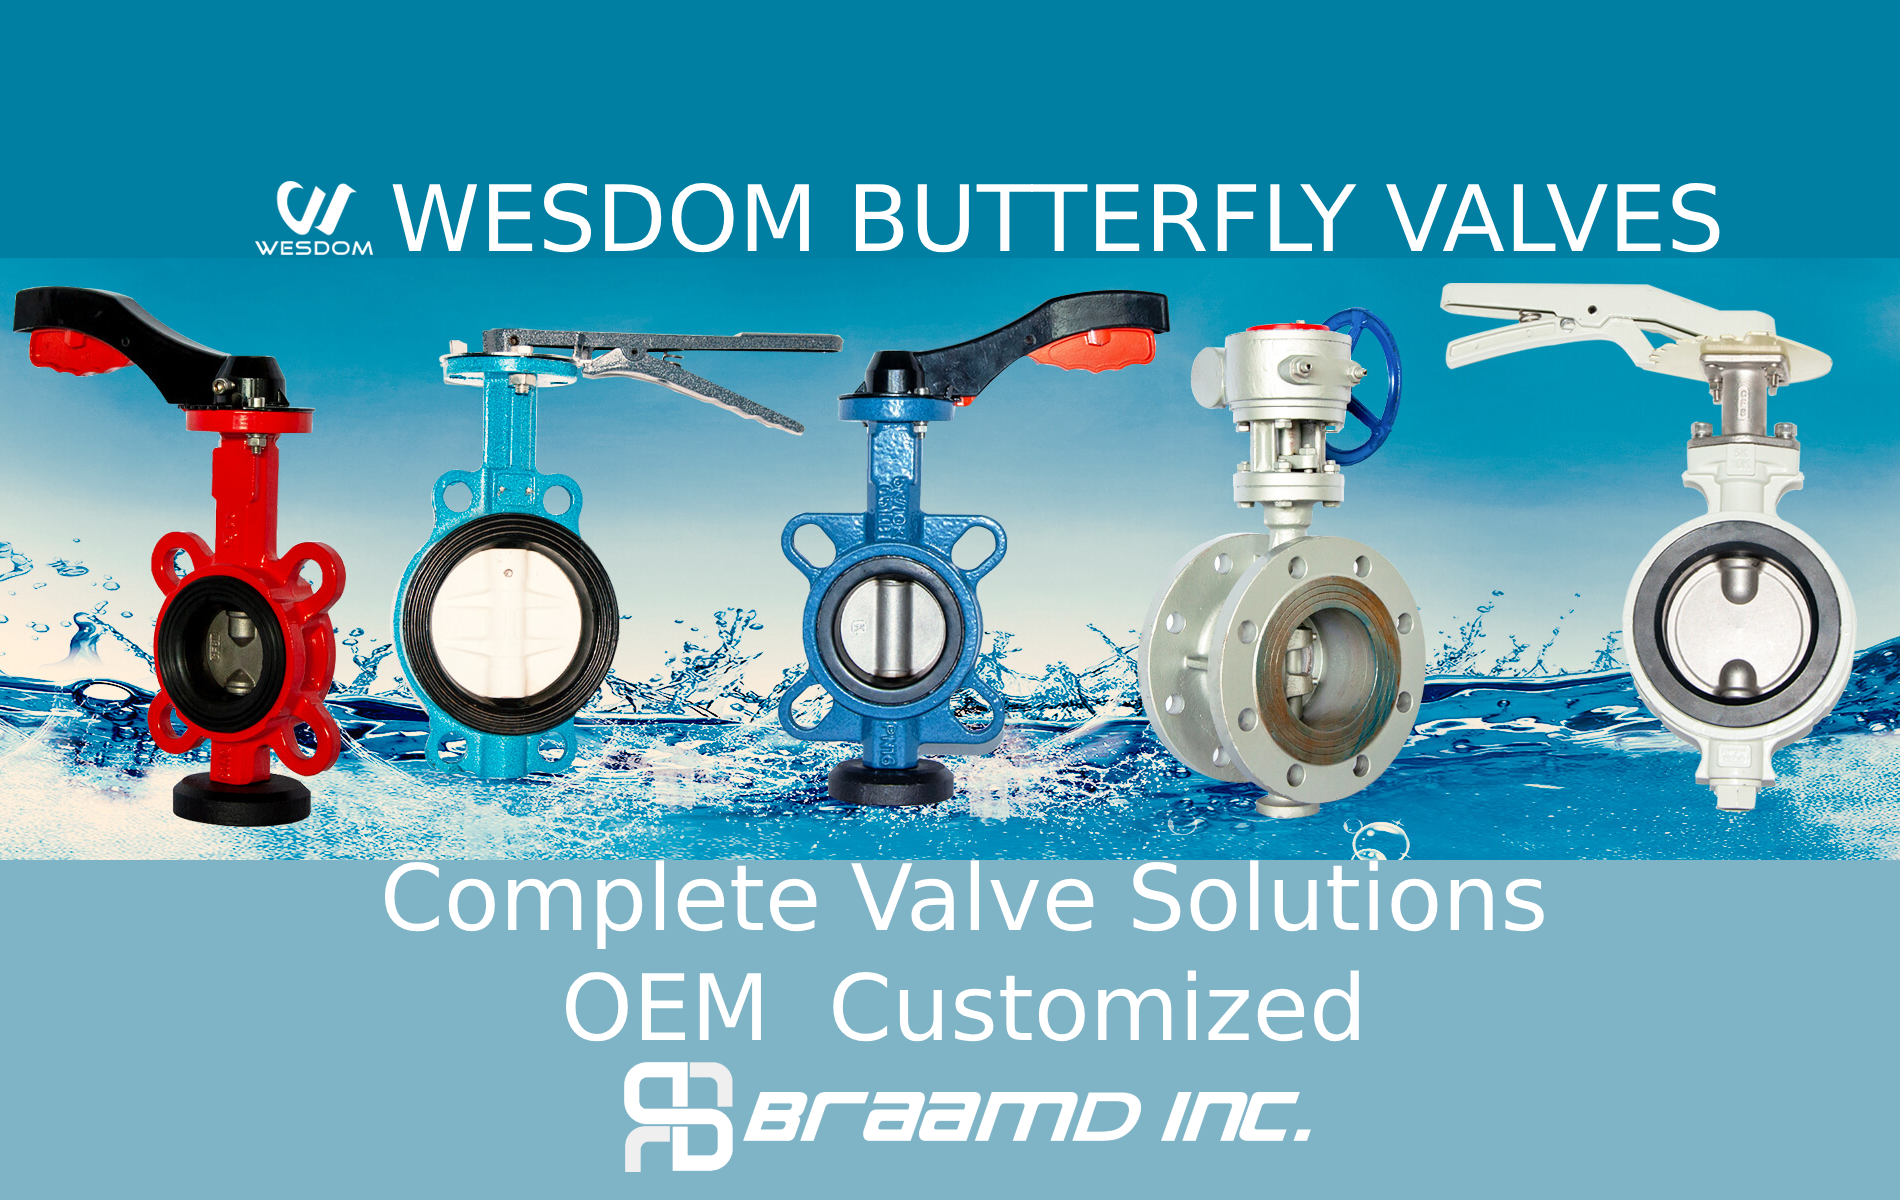 Wesdom Butterfly Valves